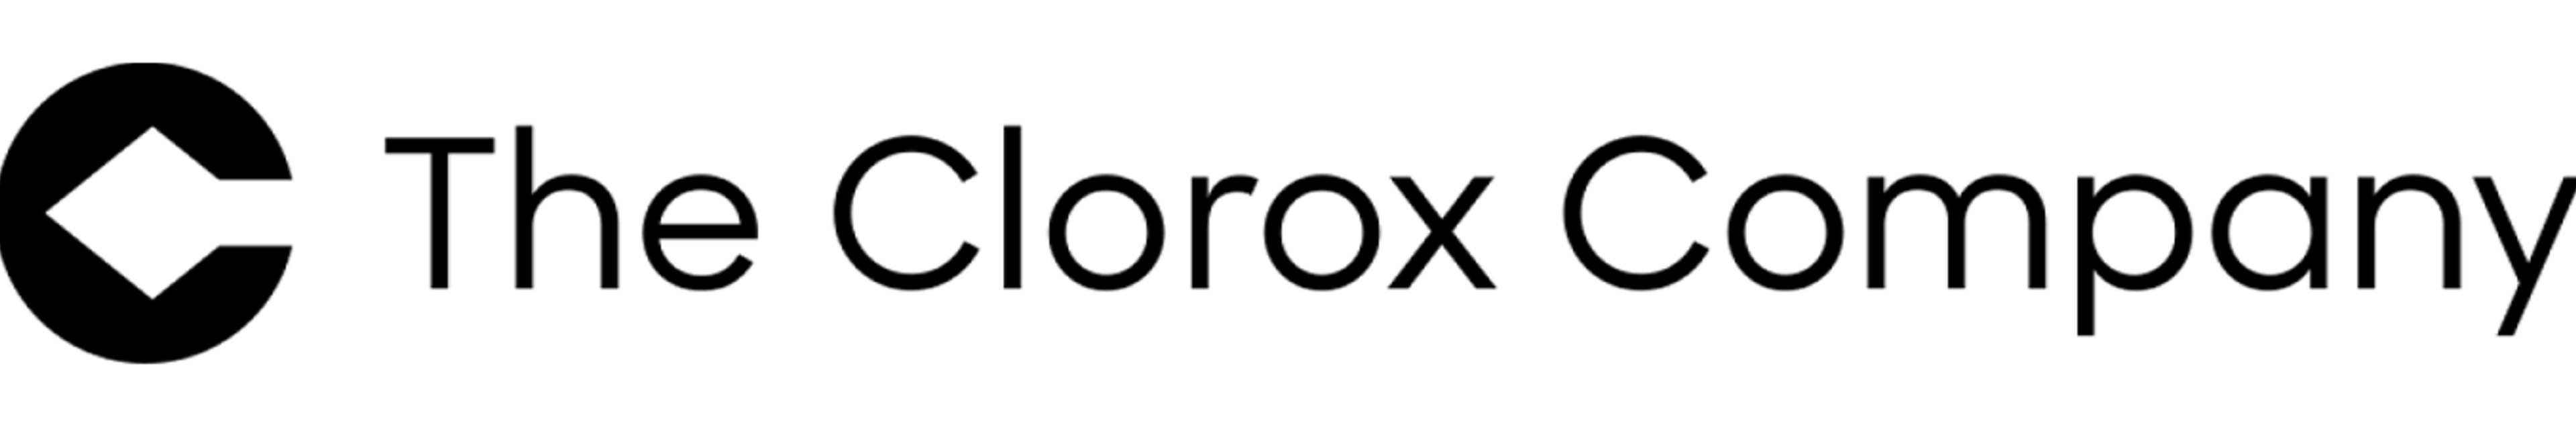 The Clorox Company logo in black on a transparent background